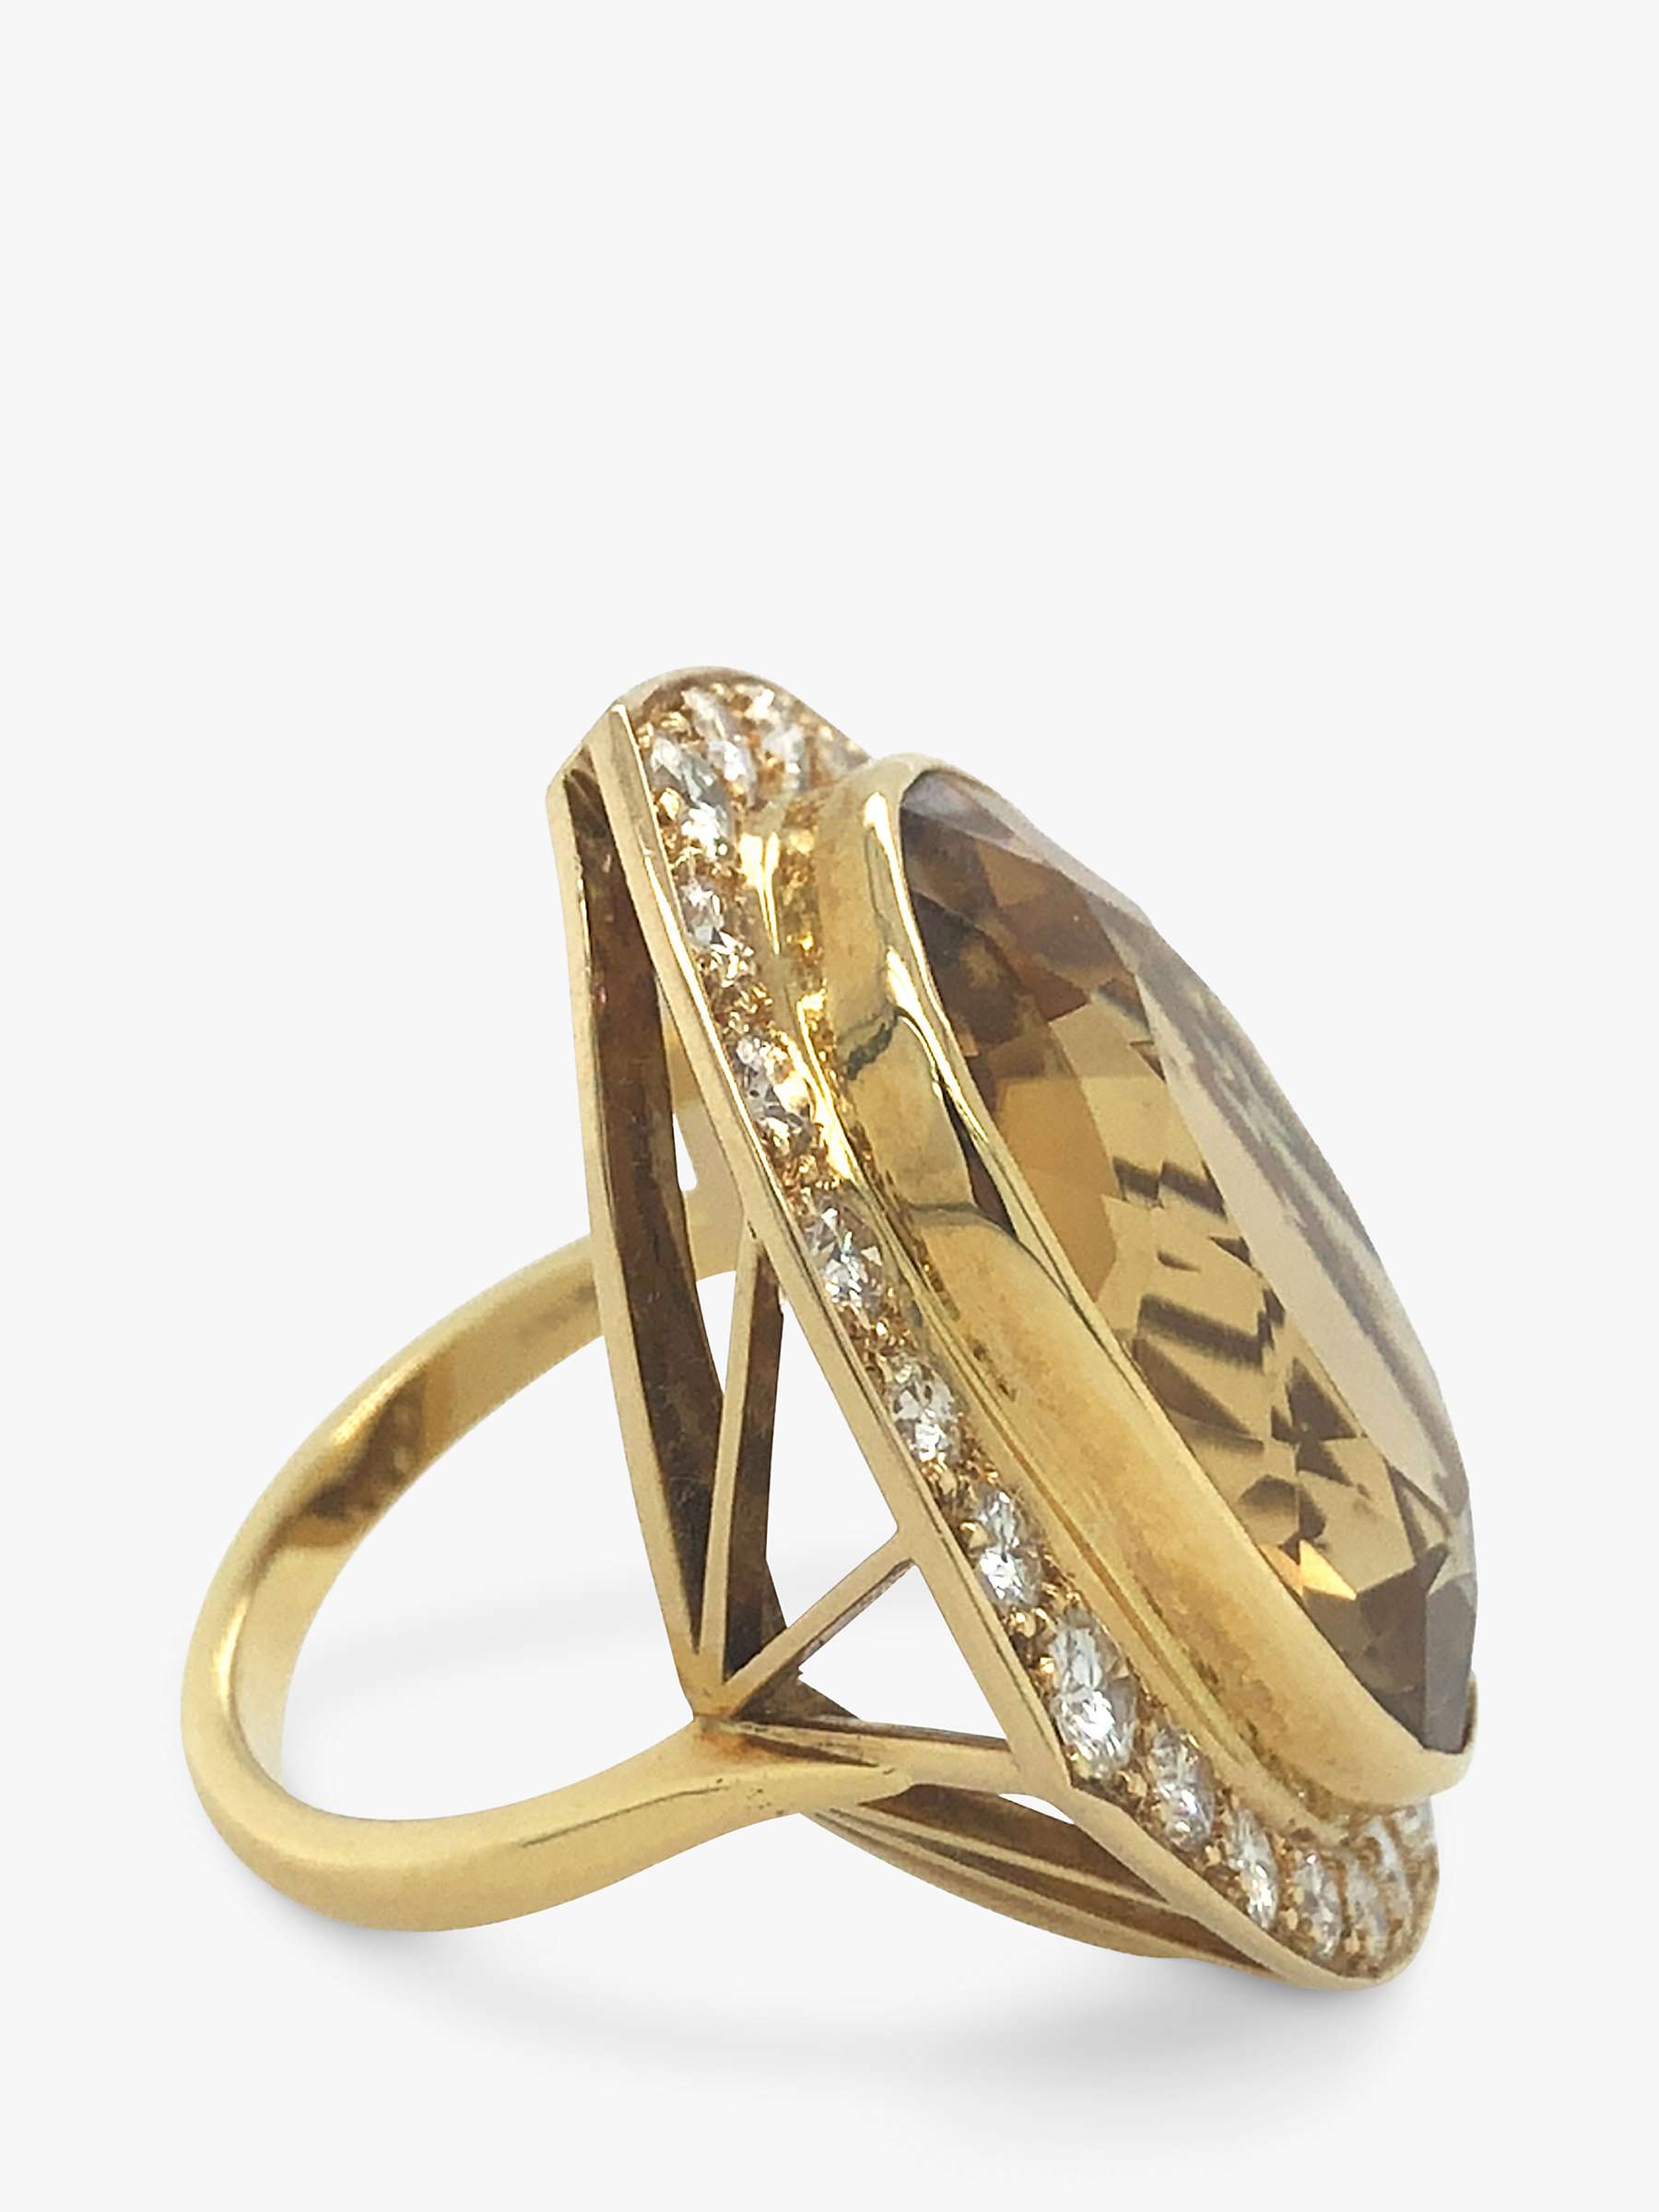 Buy Vintage Fine Jewellery Second Hand 18ct Yellow Gold Diamond & Oval Citrine Ring, Dated Circa 1960s Online at johnlewis.com